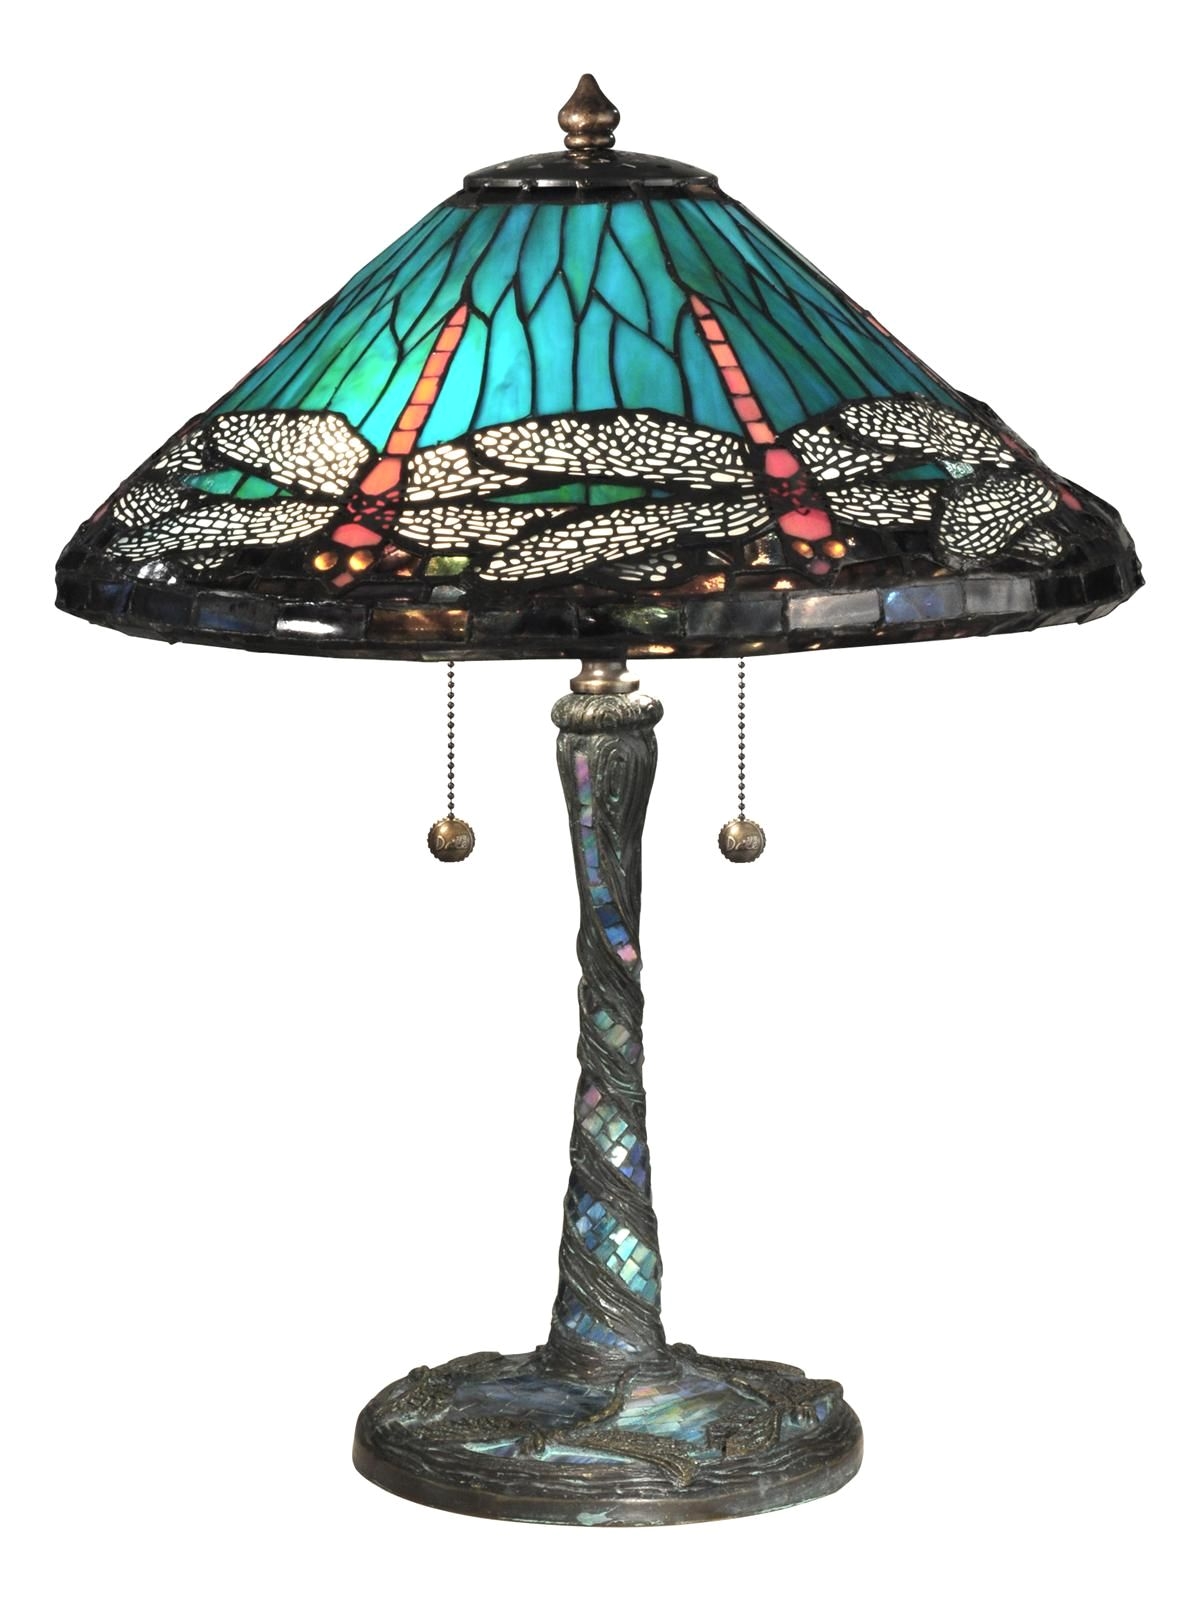 blue dragonfly tiffany lamp bing images